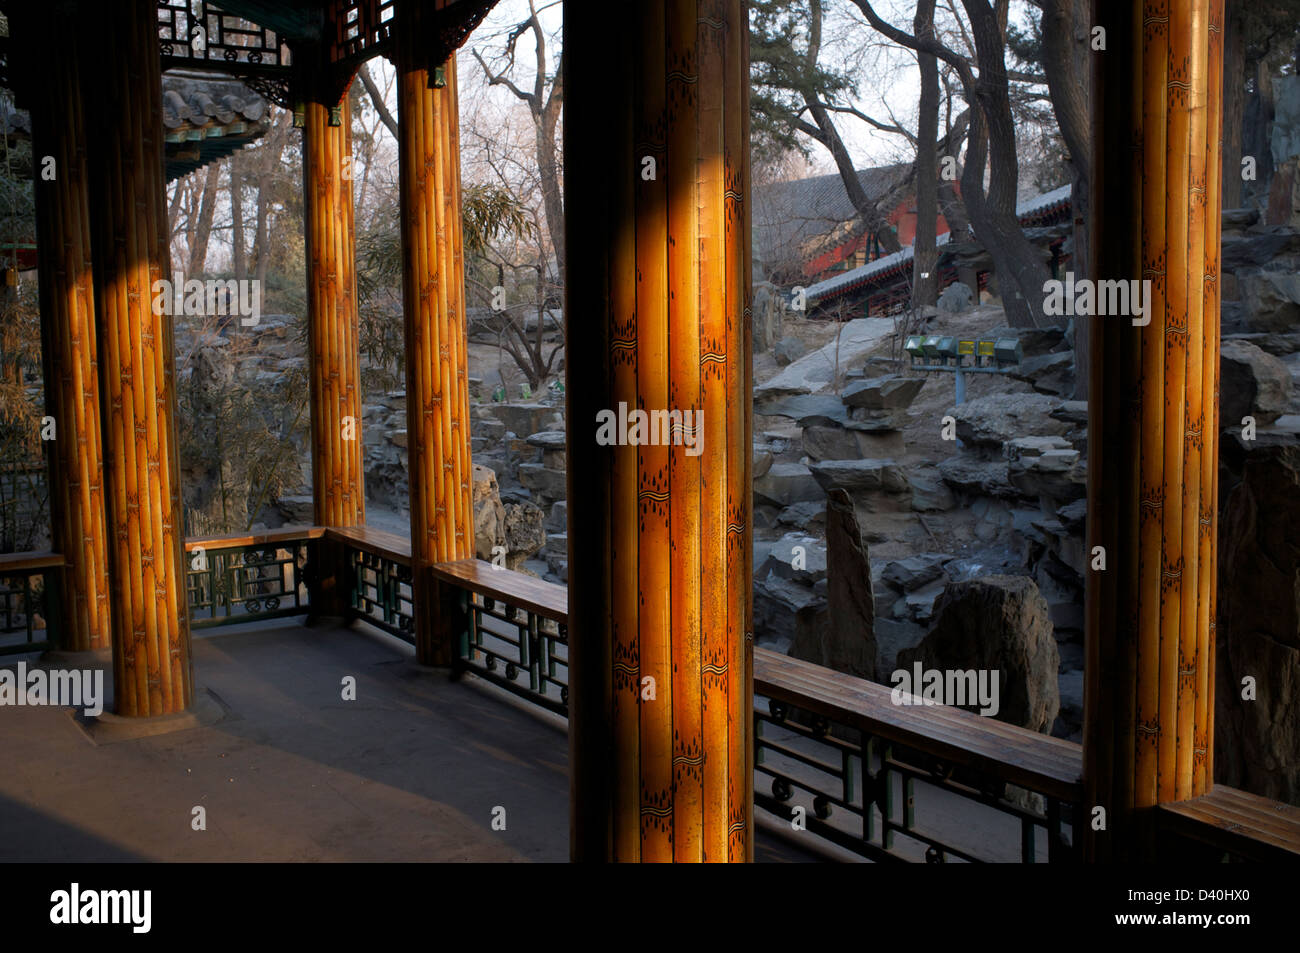 Pavilion pillars in The Prince Gong's Mansion in Beijing, China. 23-Feb-2013 Stock Photo